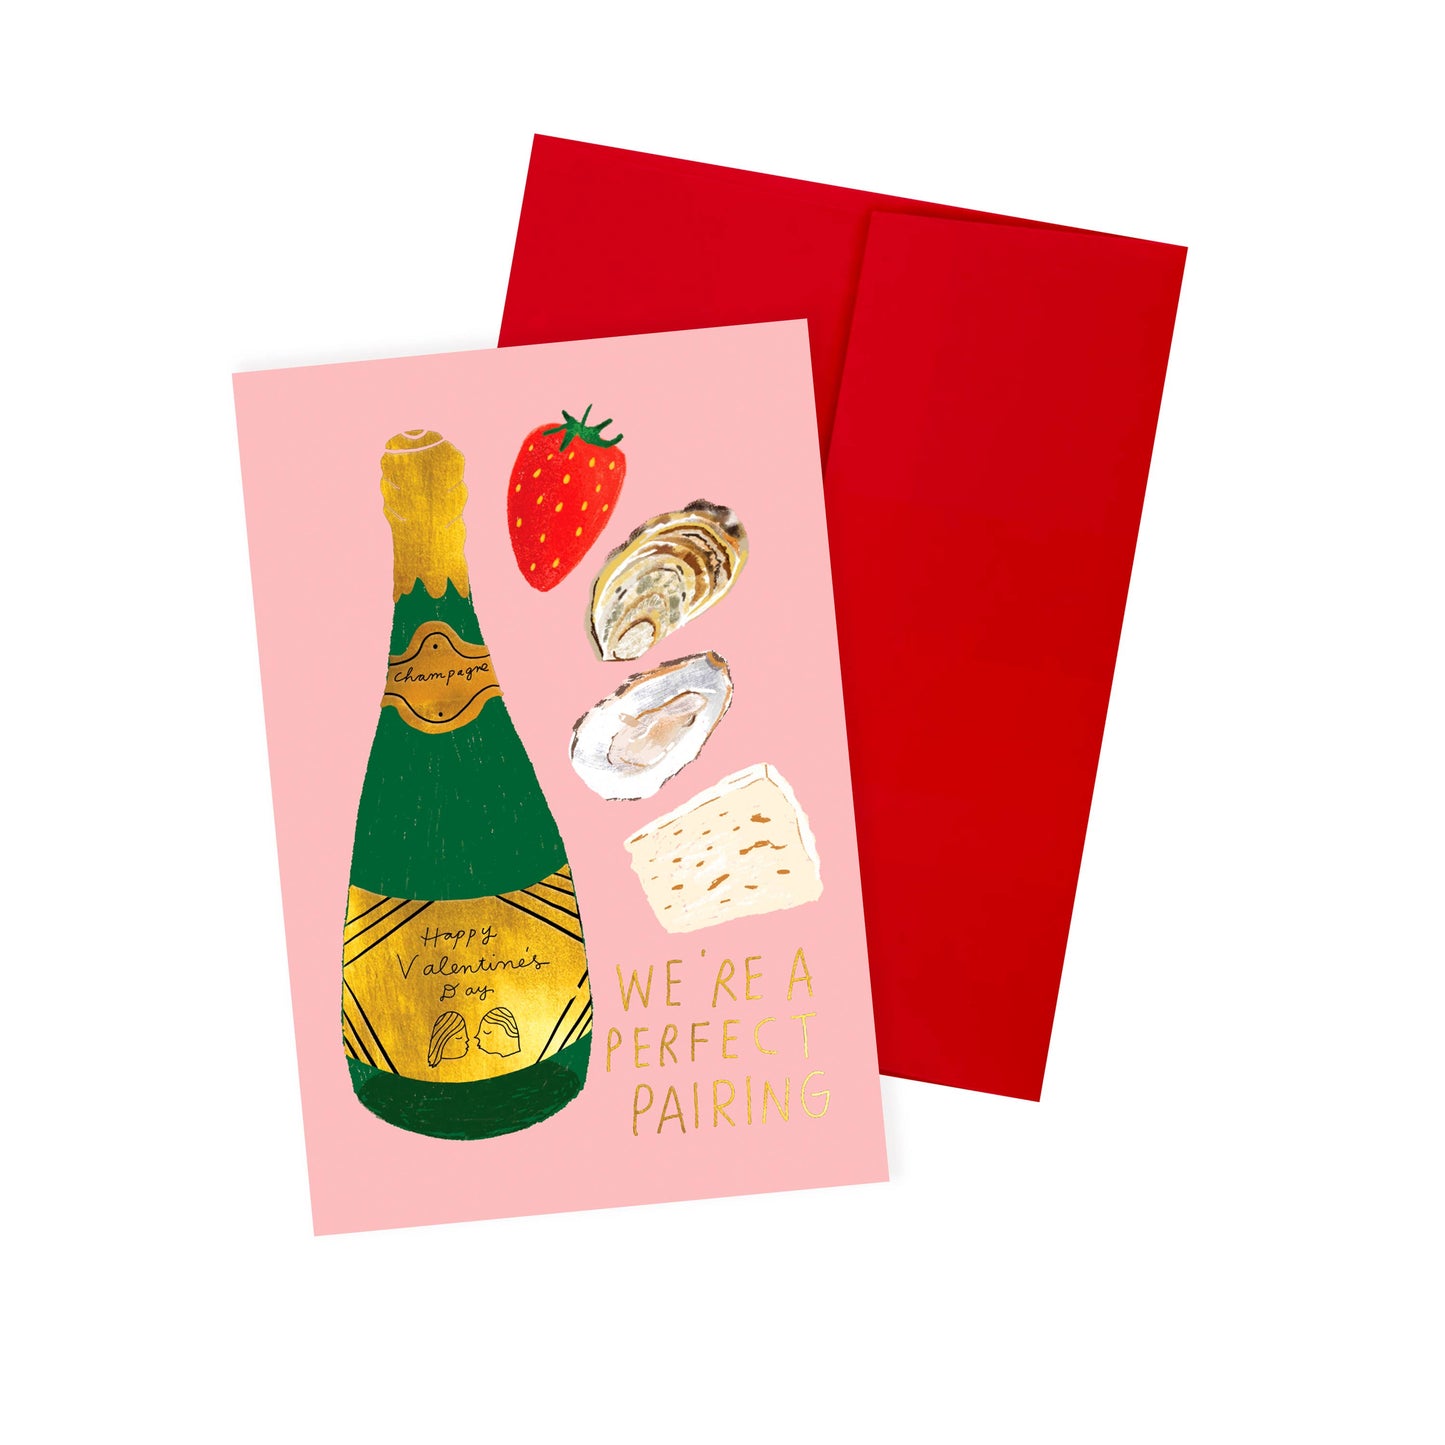 Pink greeting card that has a green and gold bottle of champagne on the left side and a strawberry, oysters and cake on the right. Bottom right corner reads "We're a perfect pairing" Comes with a red envelope.  